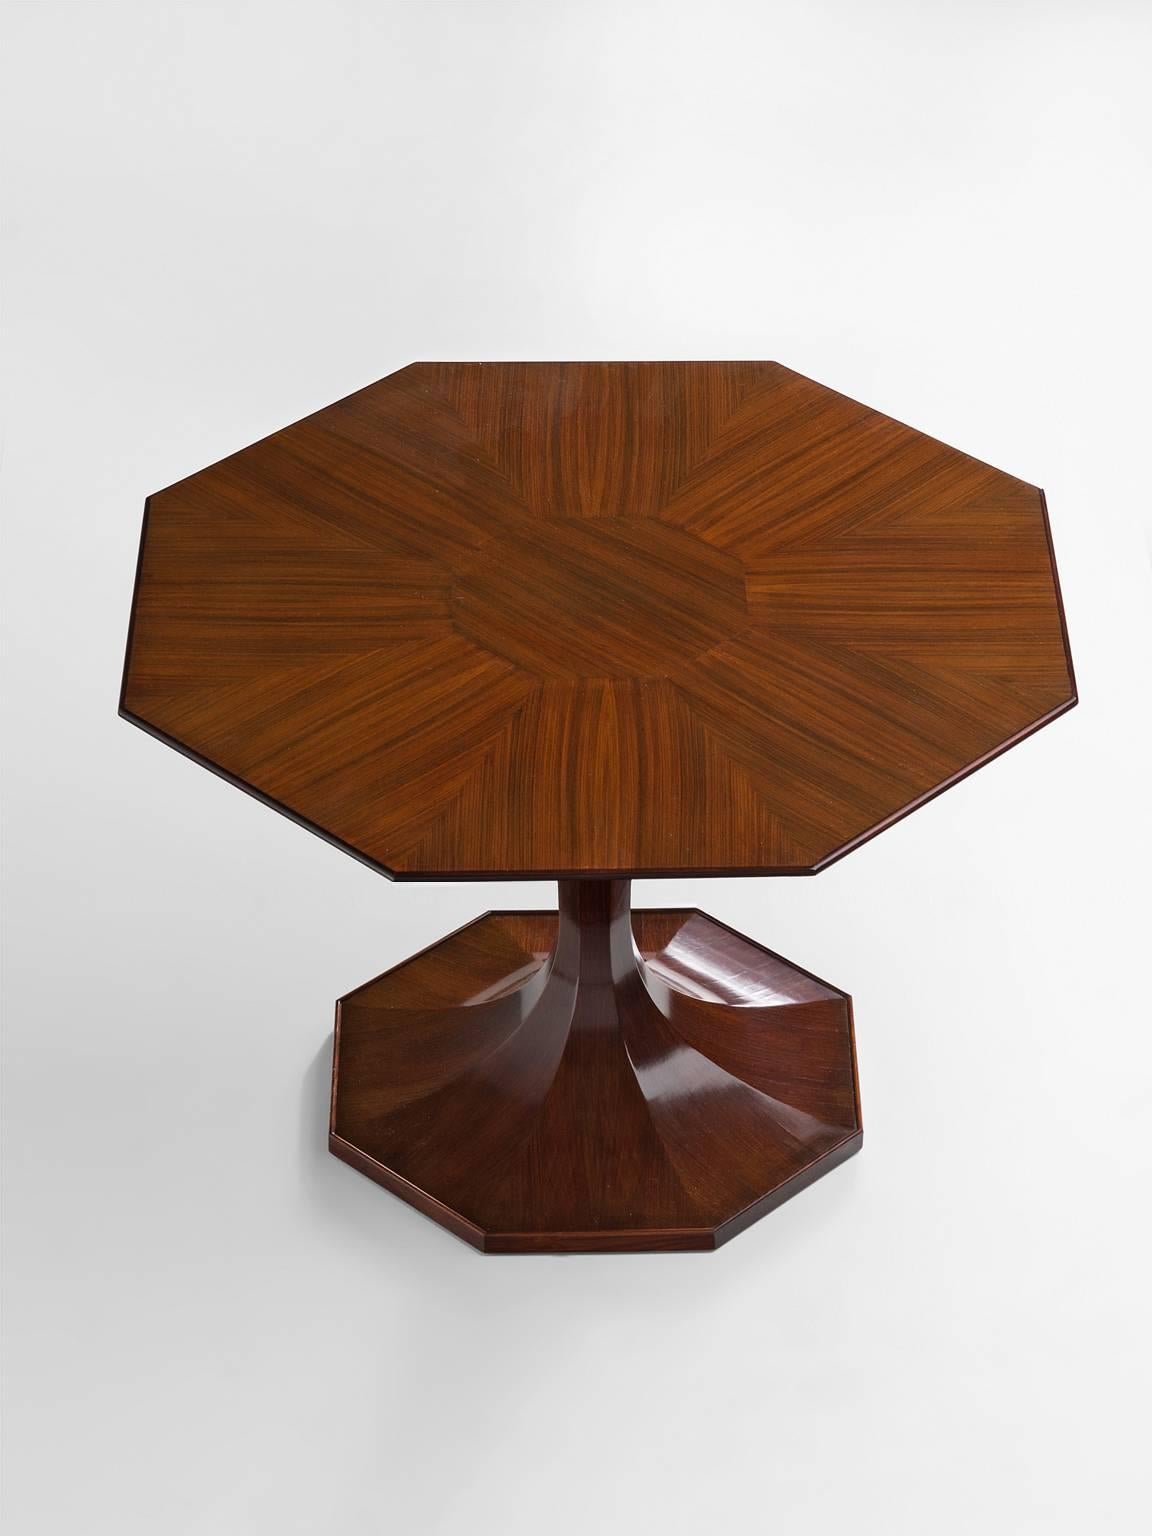 Table, walnut, by Luigi Massoni, Italy, 1950s. 

Octagonal pedestal dining table by Italian designer Luigi Massoni. Extremely well detailed in lining of the table, the inlay of the walnut and the sharped lines in the pedestal feet. The excellent